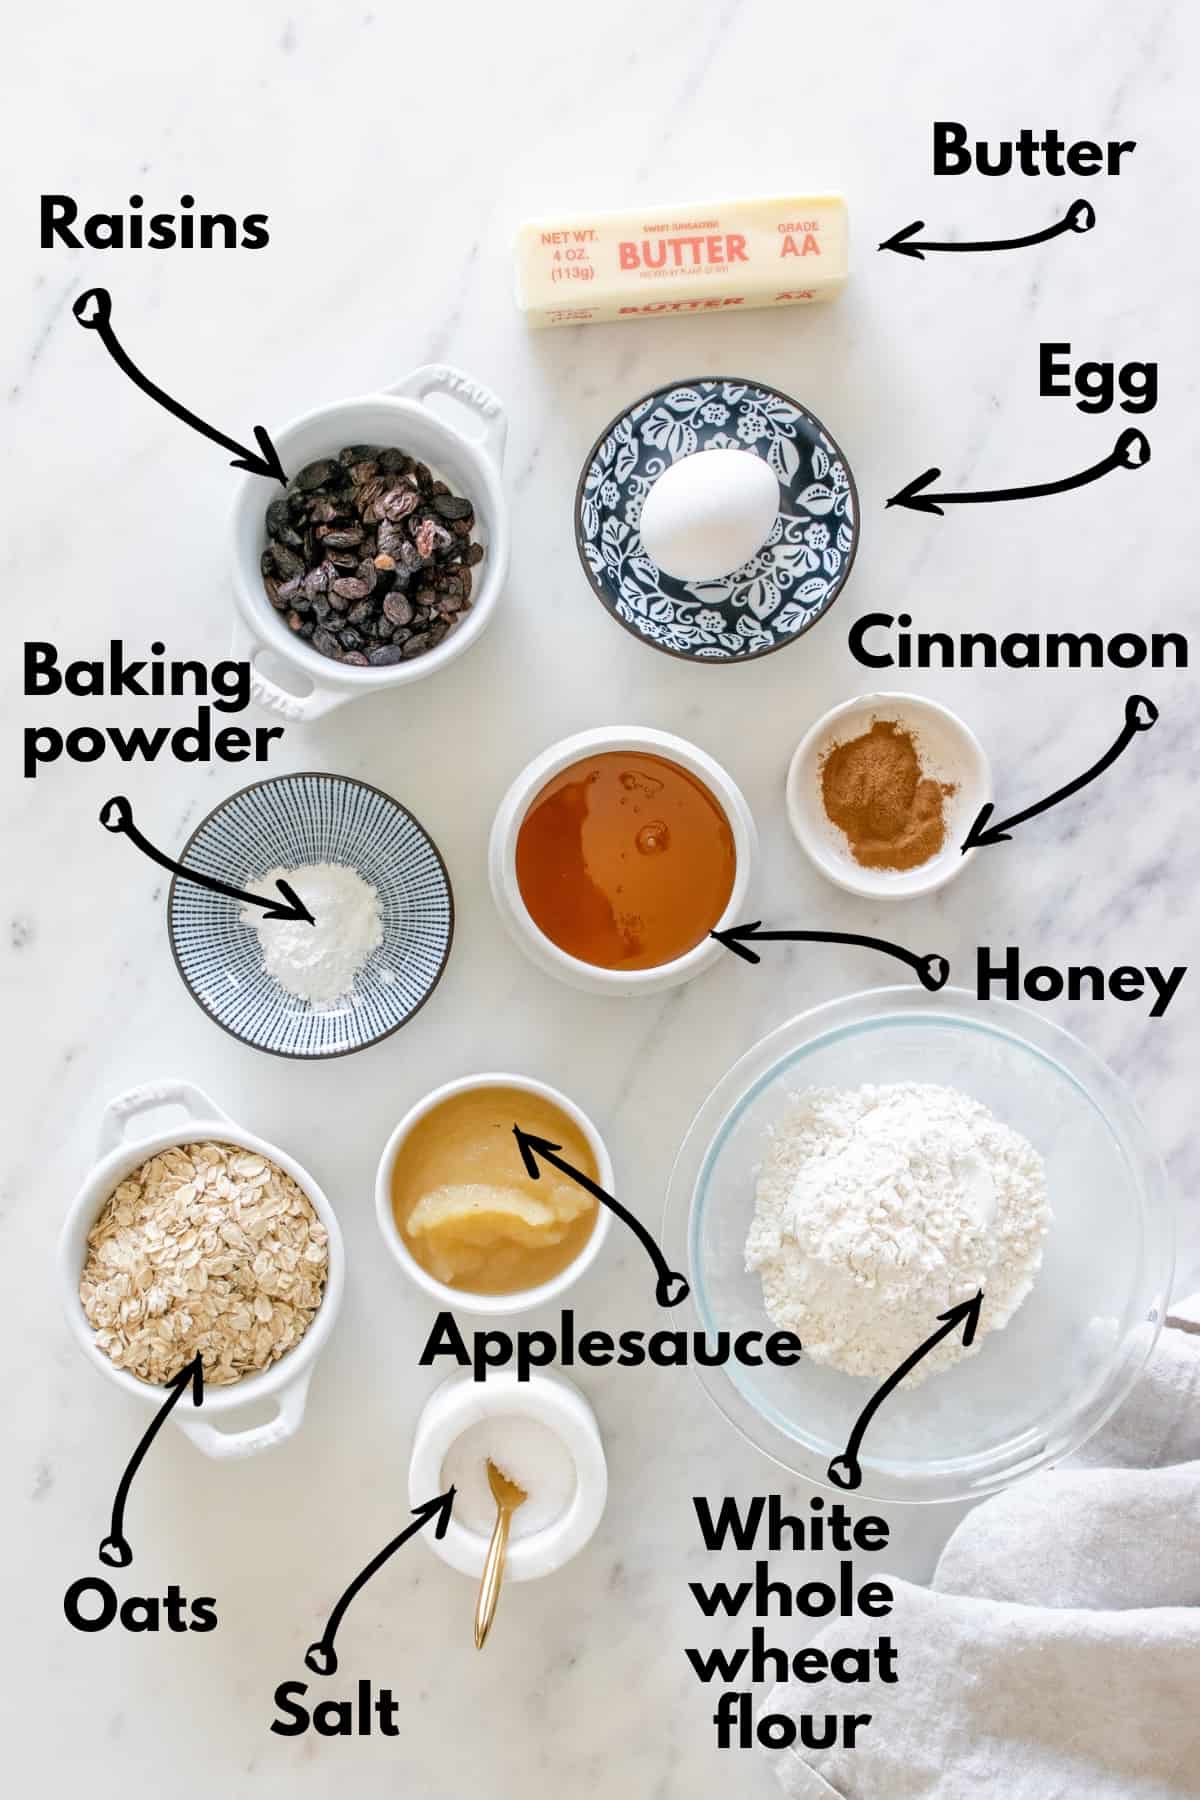 All of the cookie ingredients spread out on a countertop next to a kitchen towel.